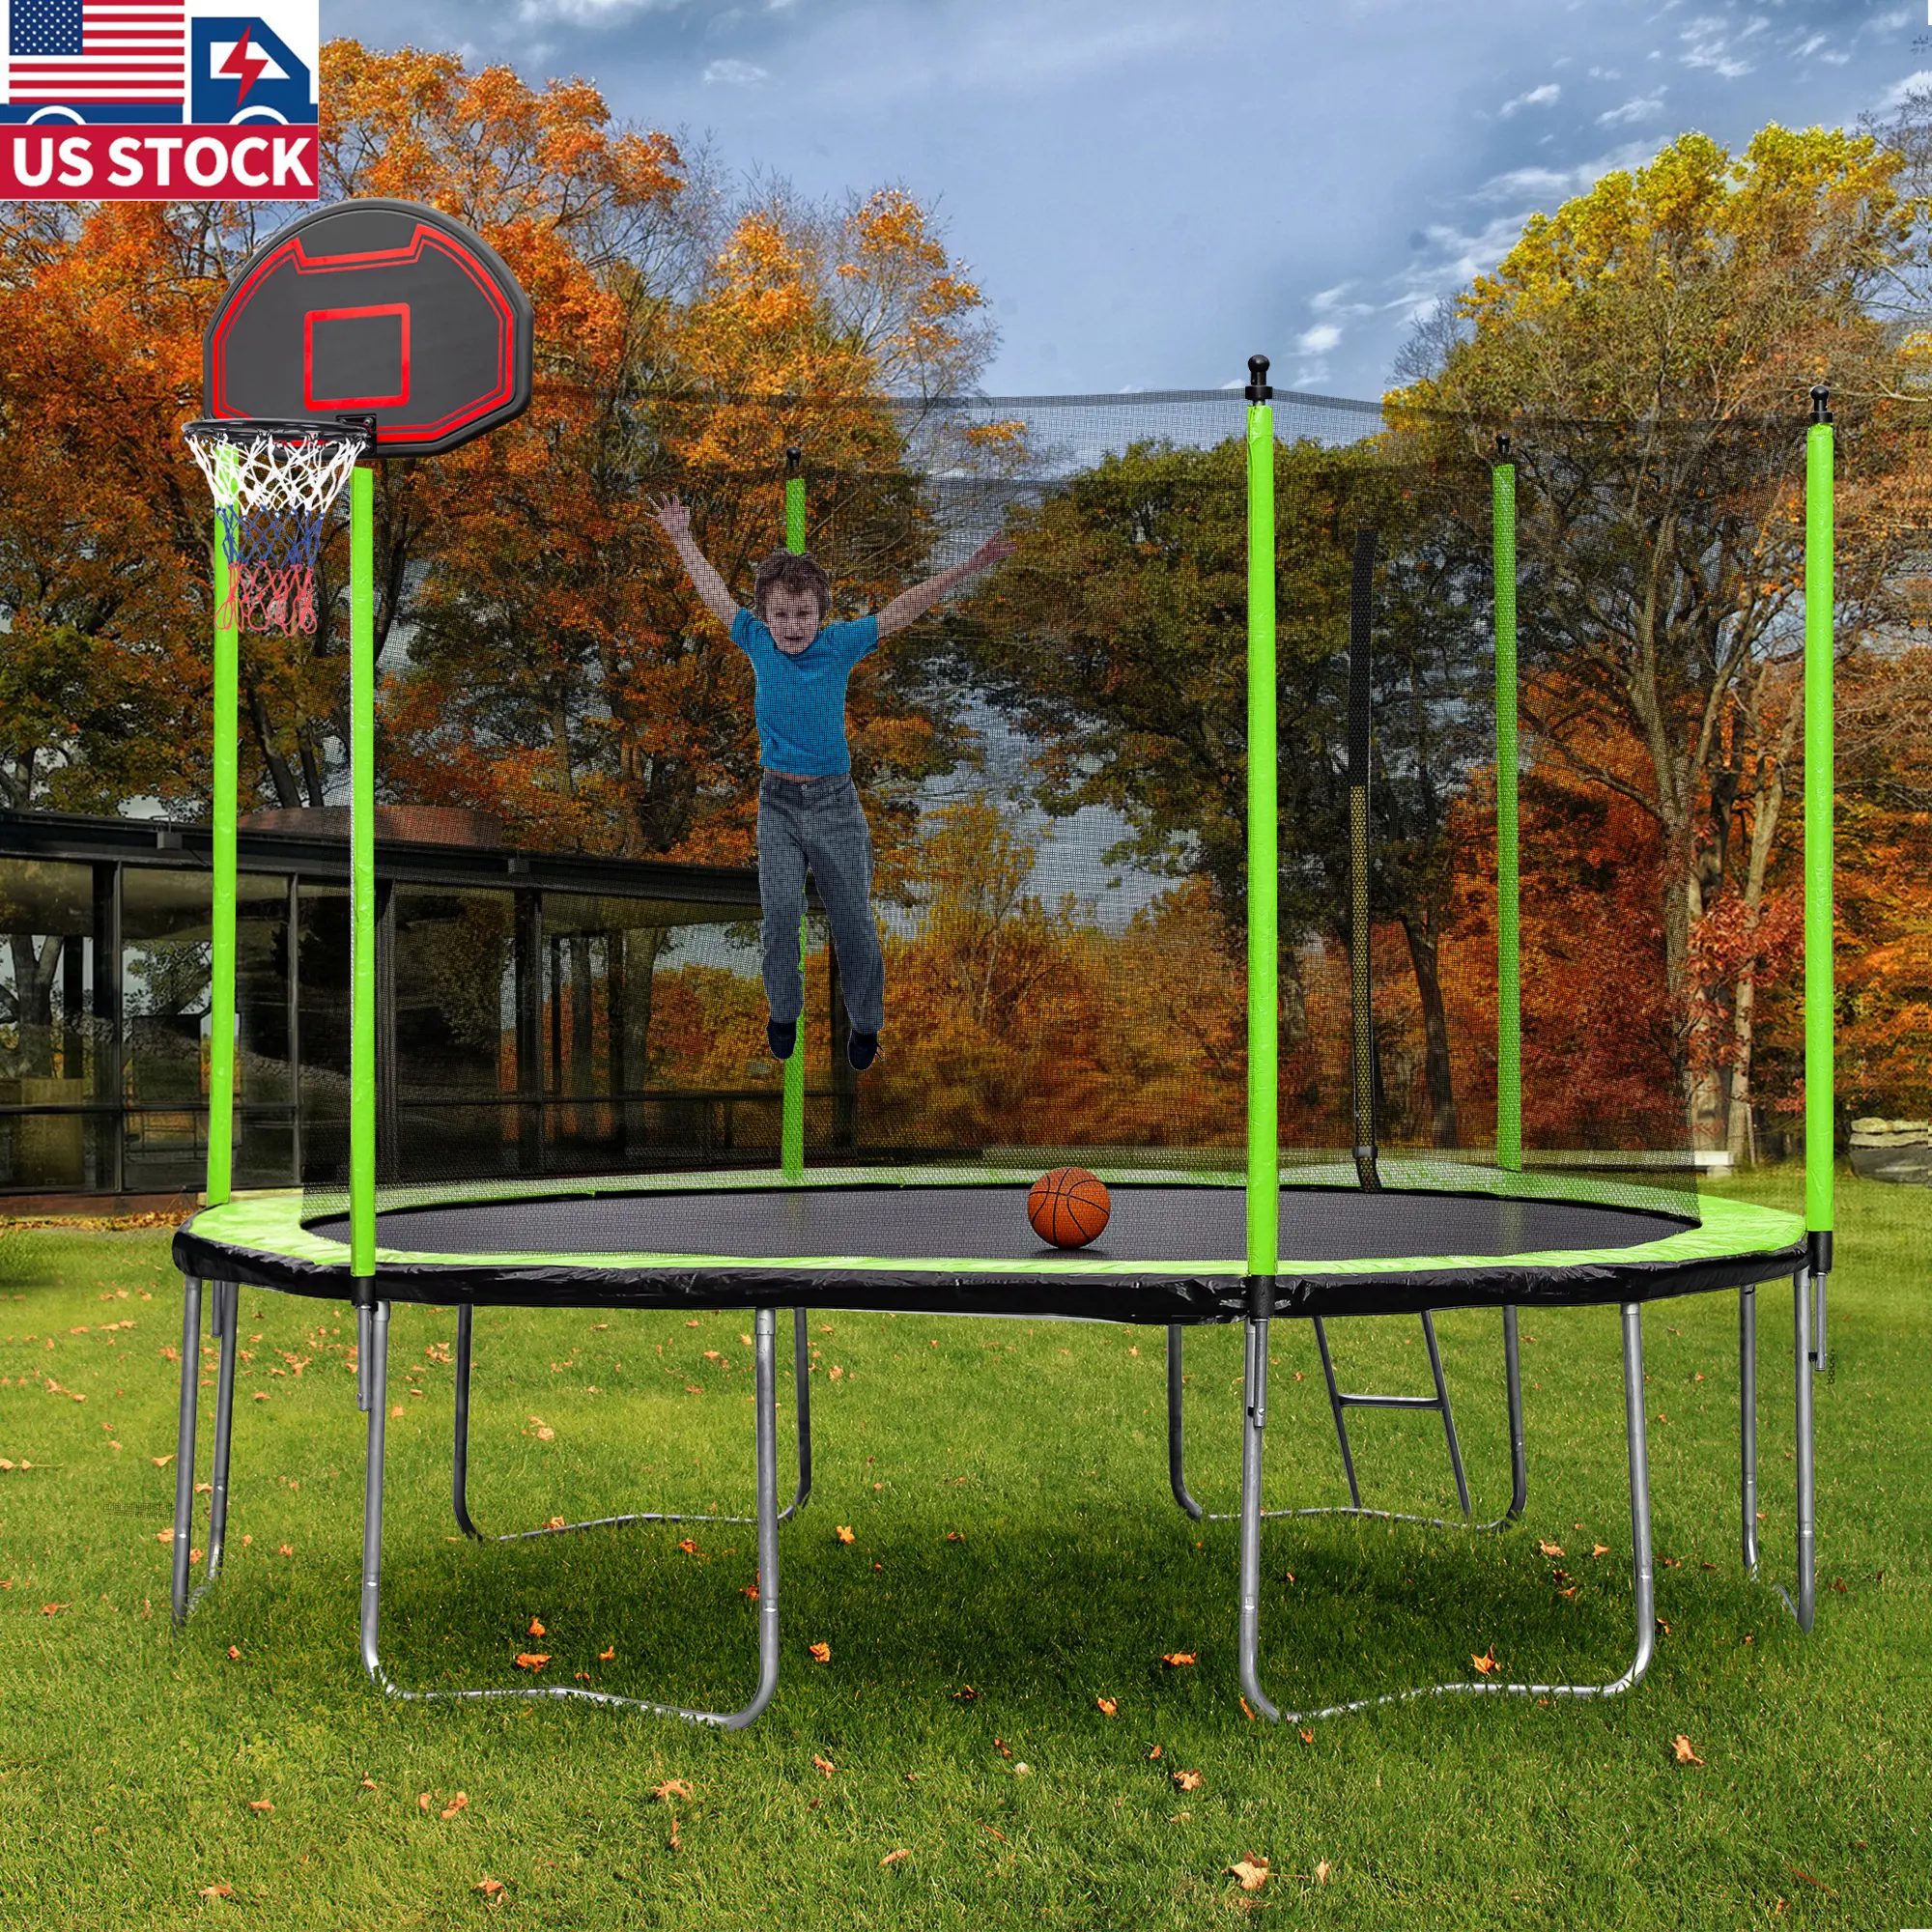 US local stock outdoor kids commercial trampoline for baby air round trampoline